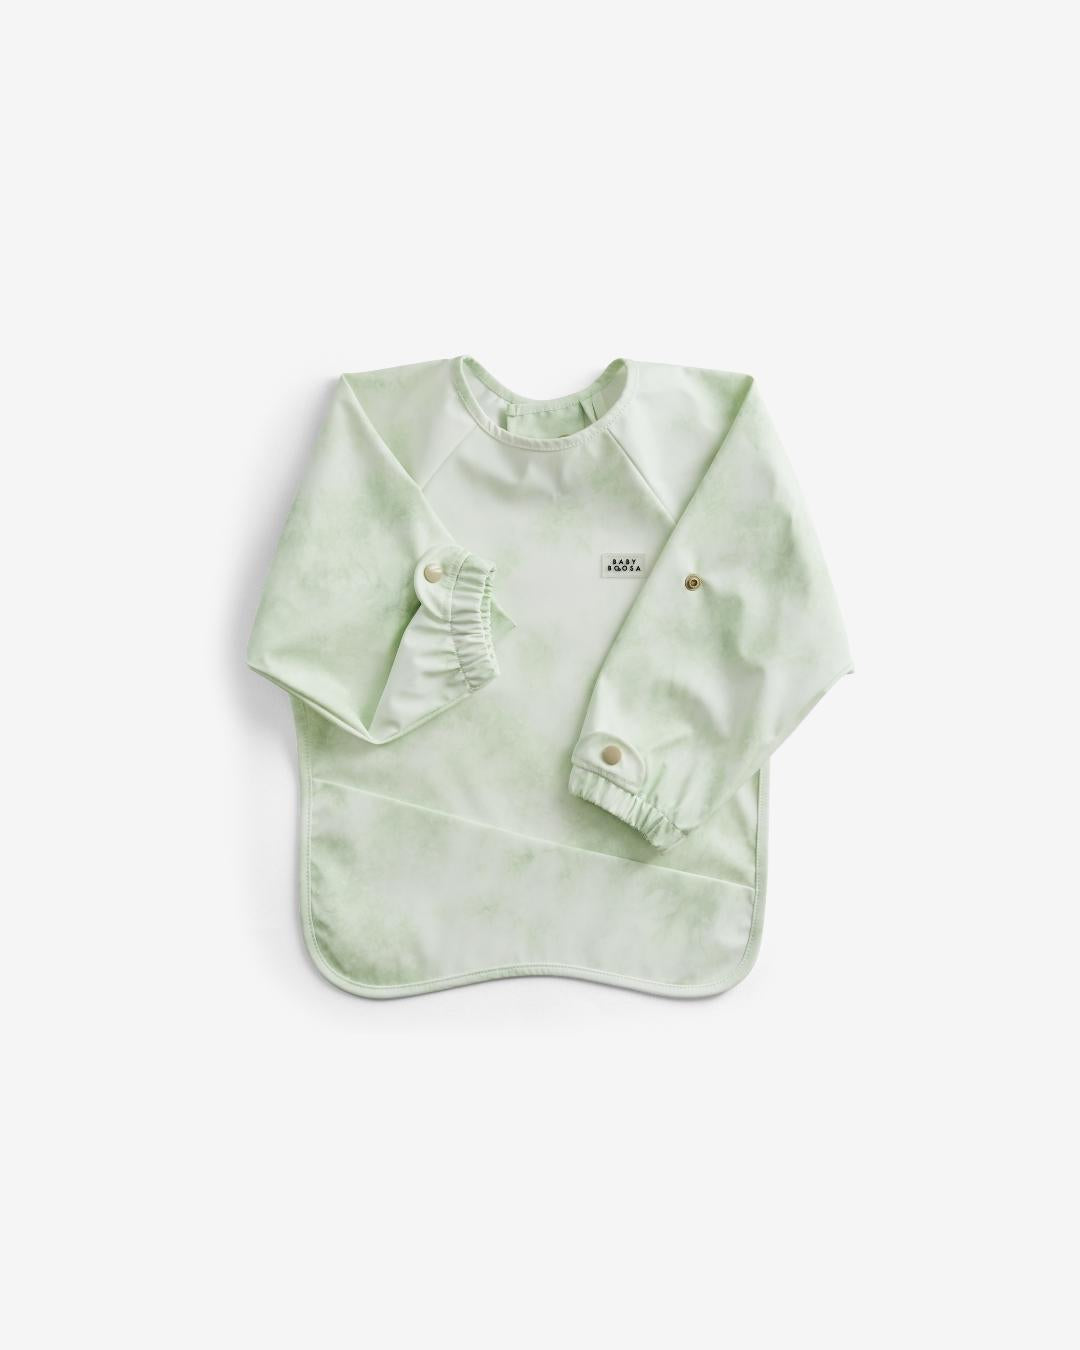 Comfort Fit Coverall Bib | Adjustable Neck &amp; Arms | Easy Clean | No-mess | Waterproof | Eco Recycled (Sage Tie Dye Print)